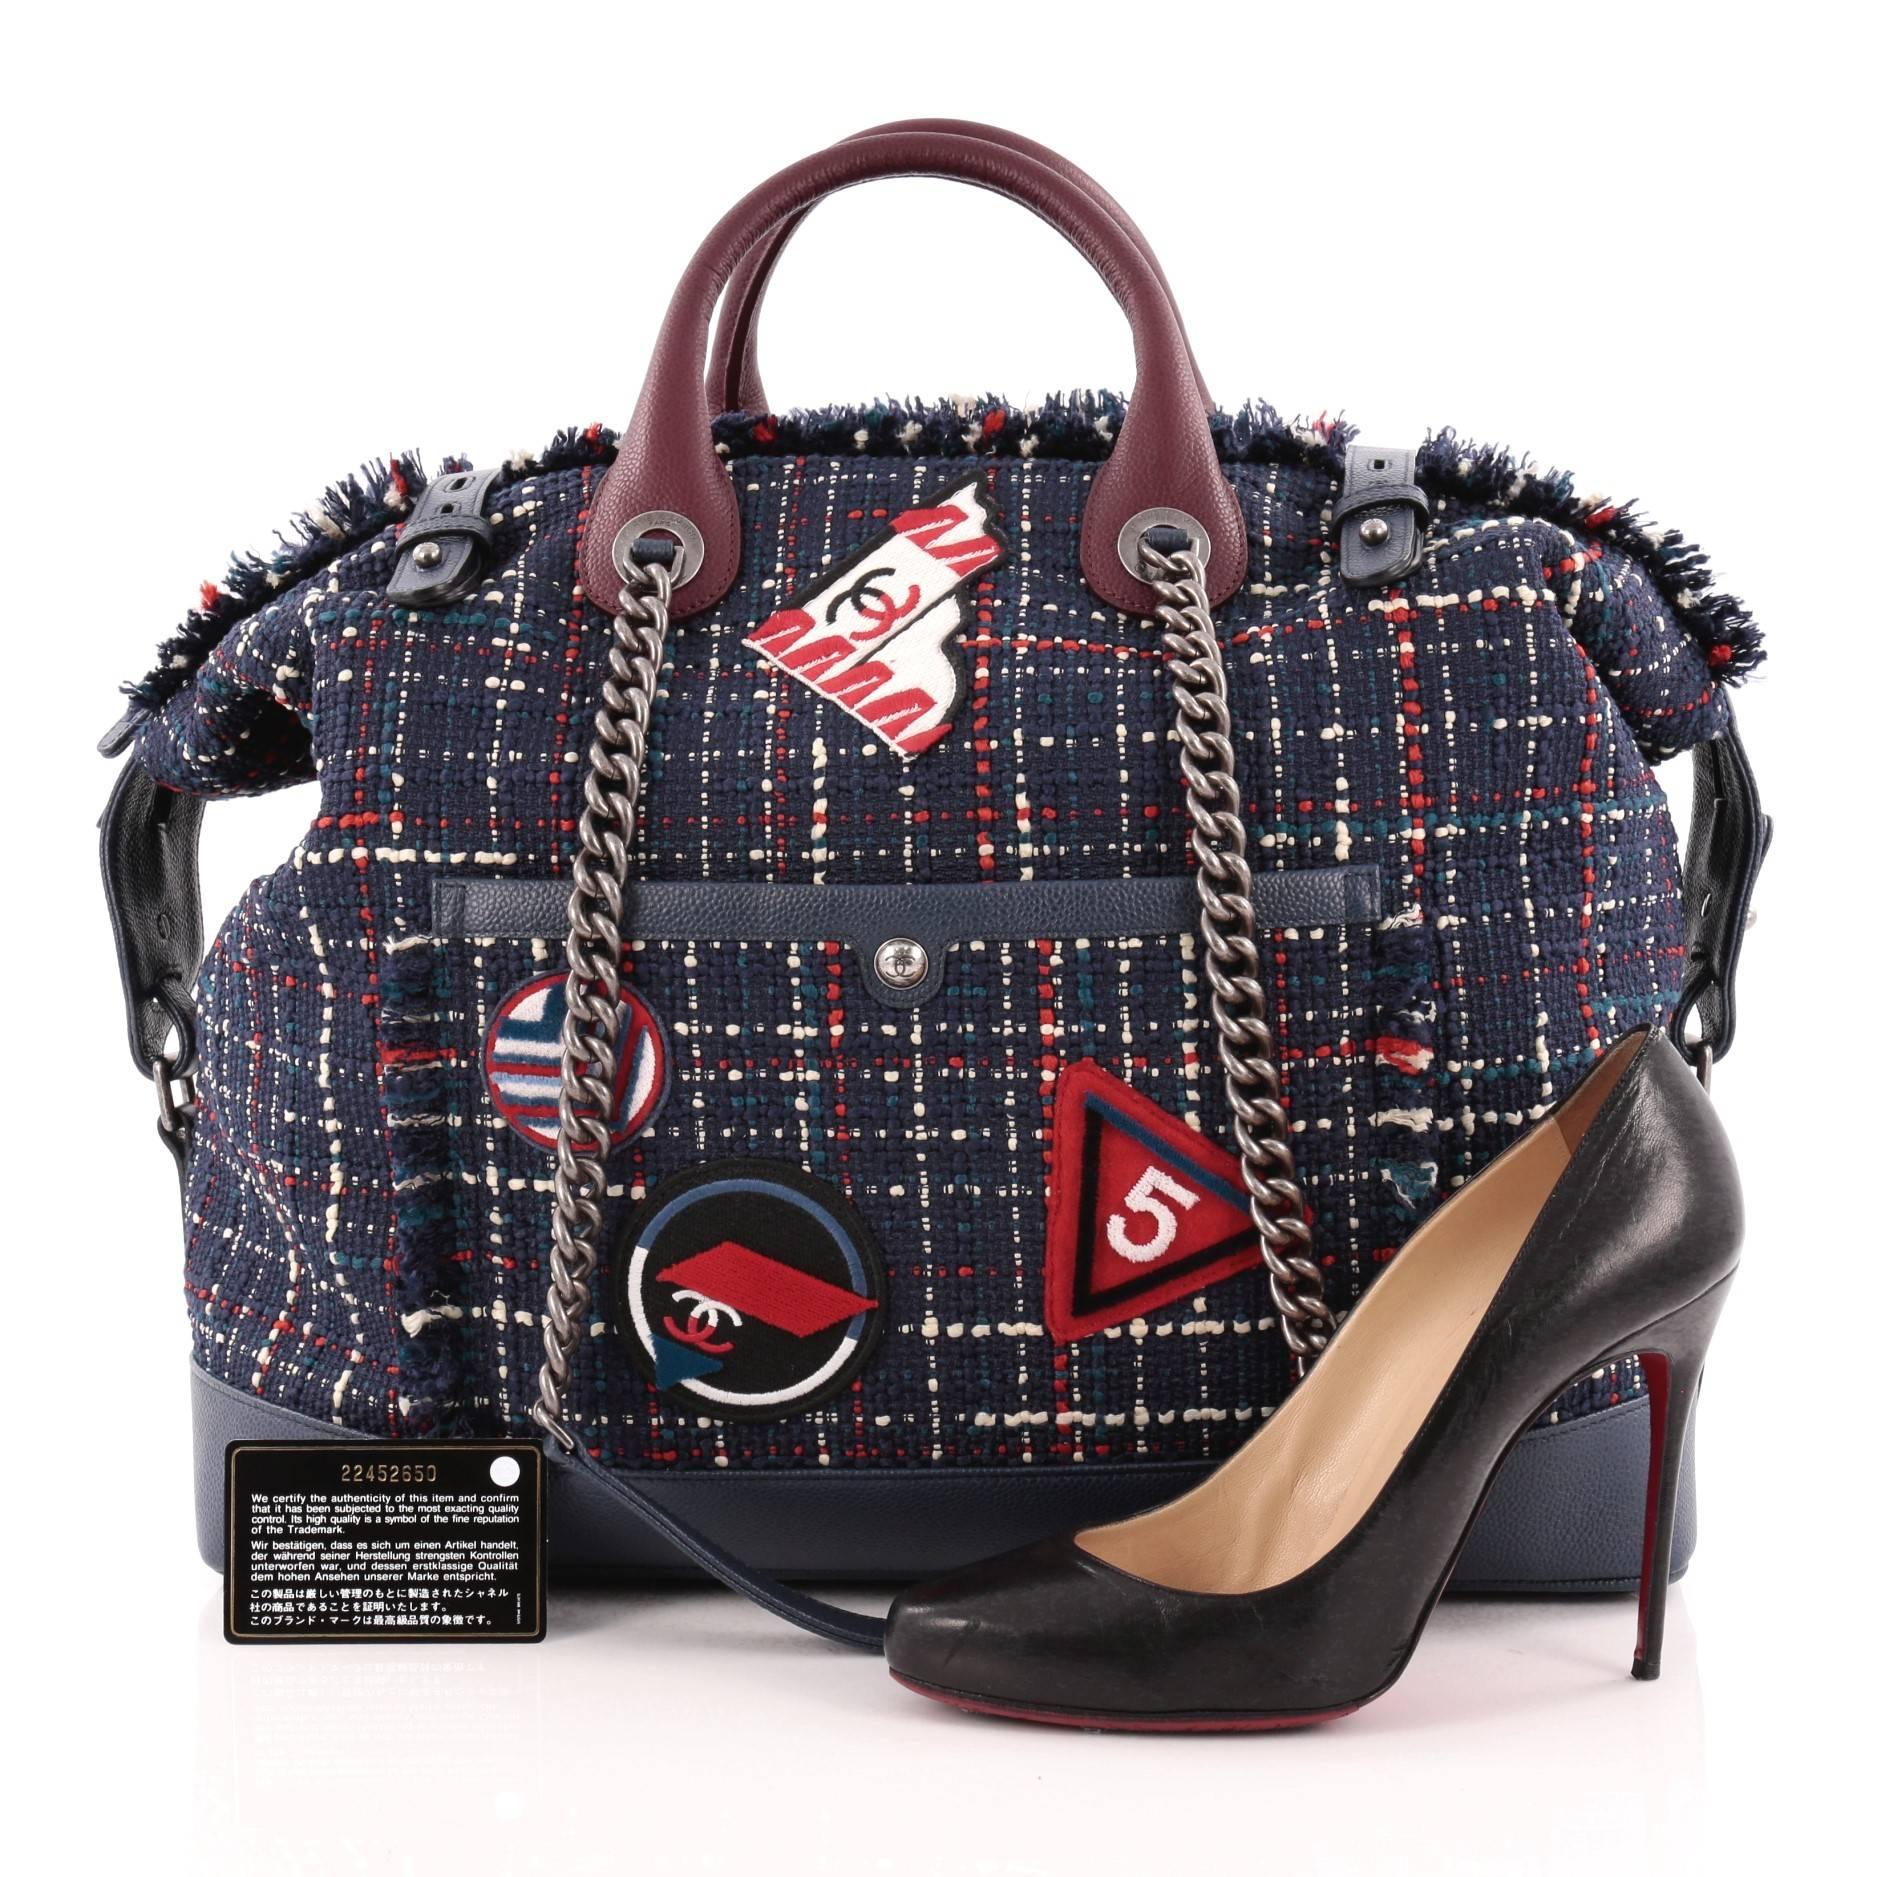 This authentic Chanel Crest Trip Bowling Bag Patch Embellished Tweed and Grained Calfskin Large presented in the brand's Spring/Summer 2016 Act II Collection is a luxurious travel piece to glam up your casual look. Crafted in navy blue tweed with